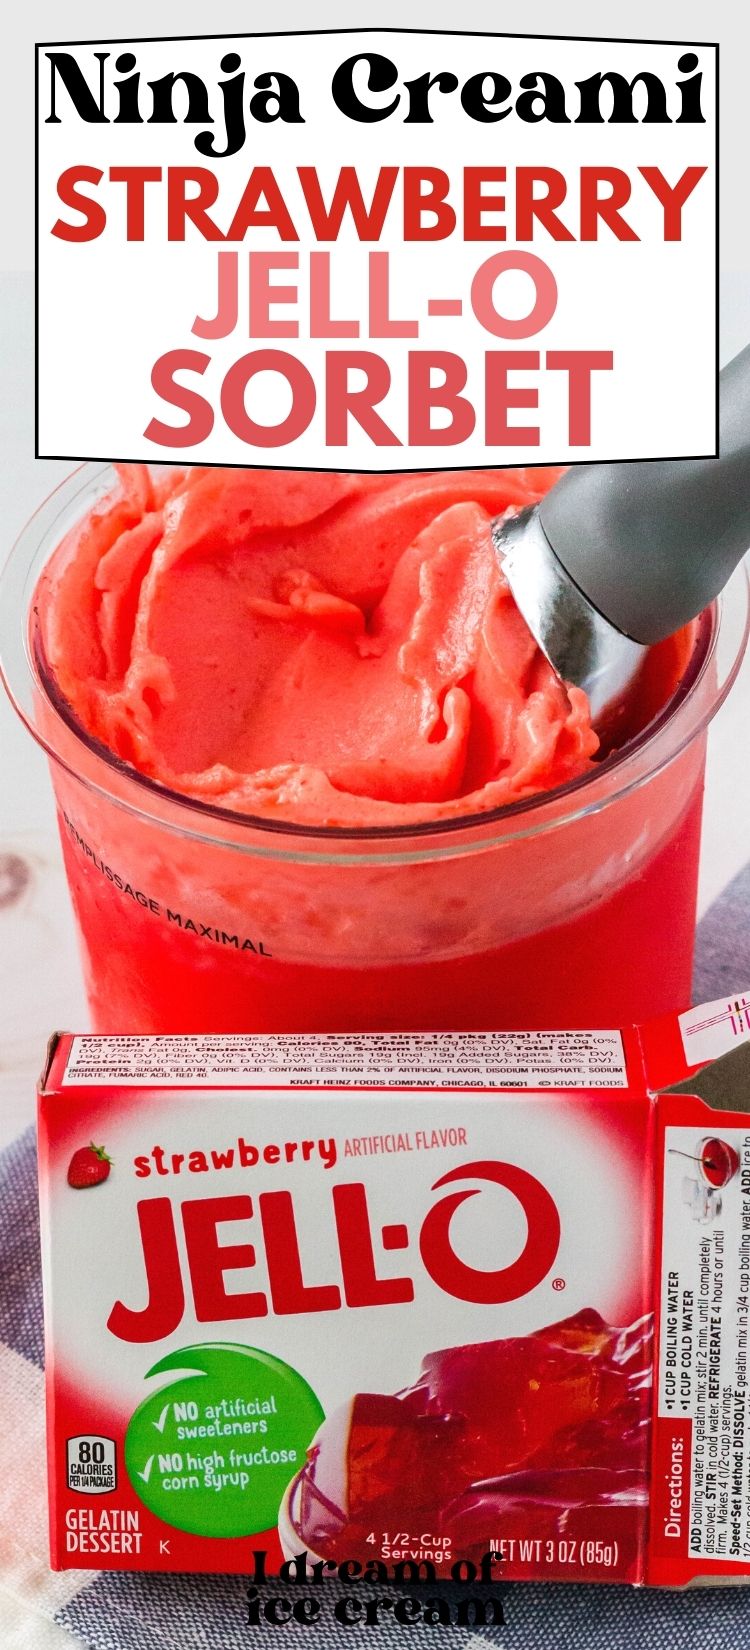 a Ninja Creami pint container of strawberry sorbet with an ice cream scoop in it, along with a box of strawberry Jell-O in front of the pint.